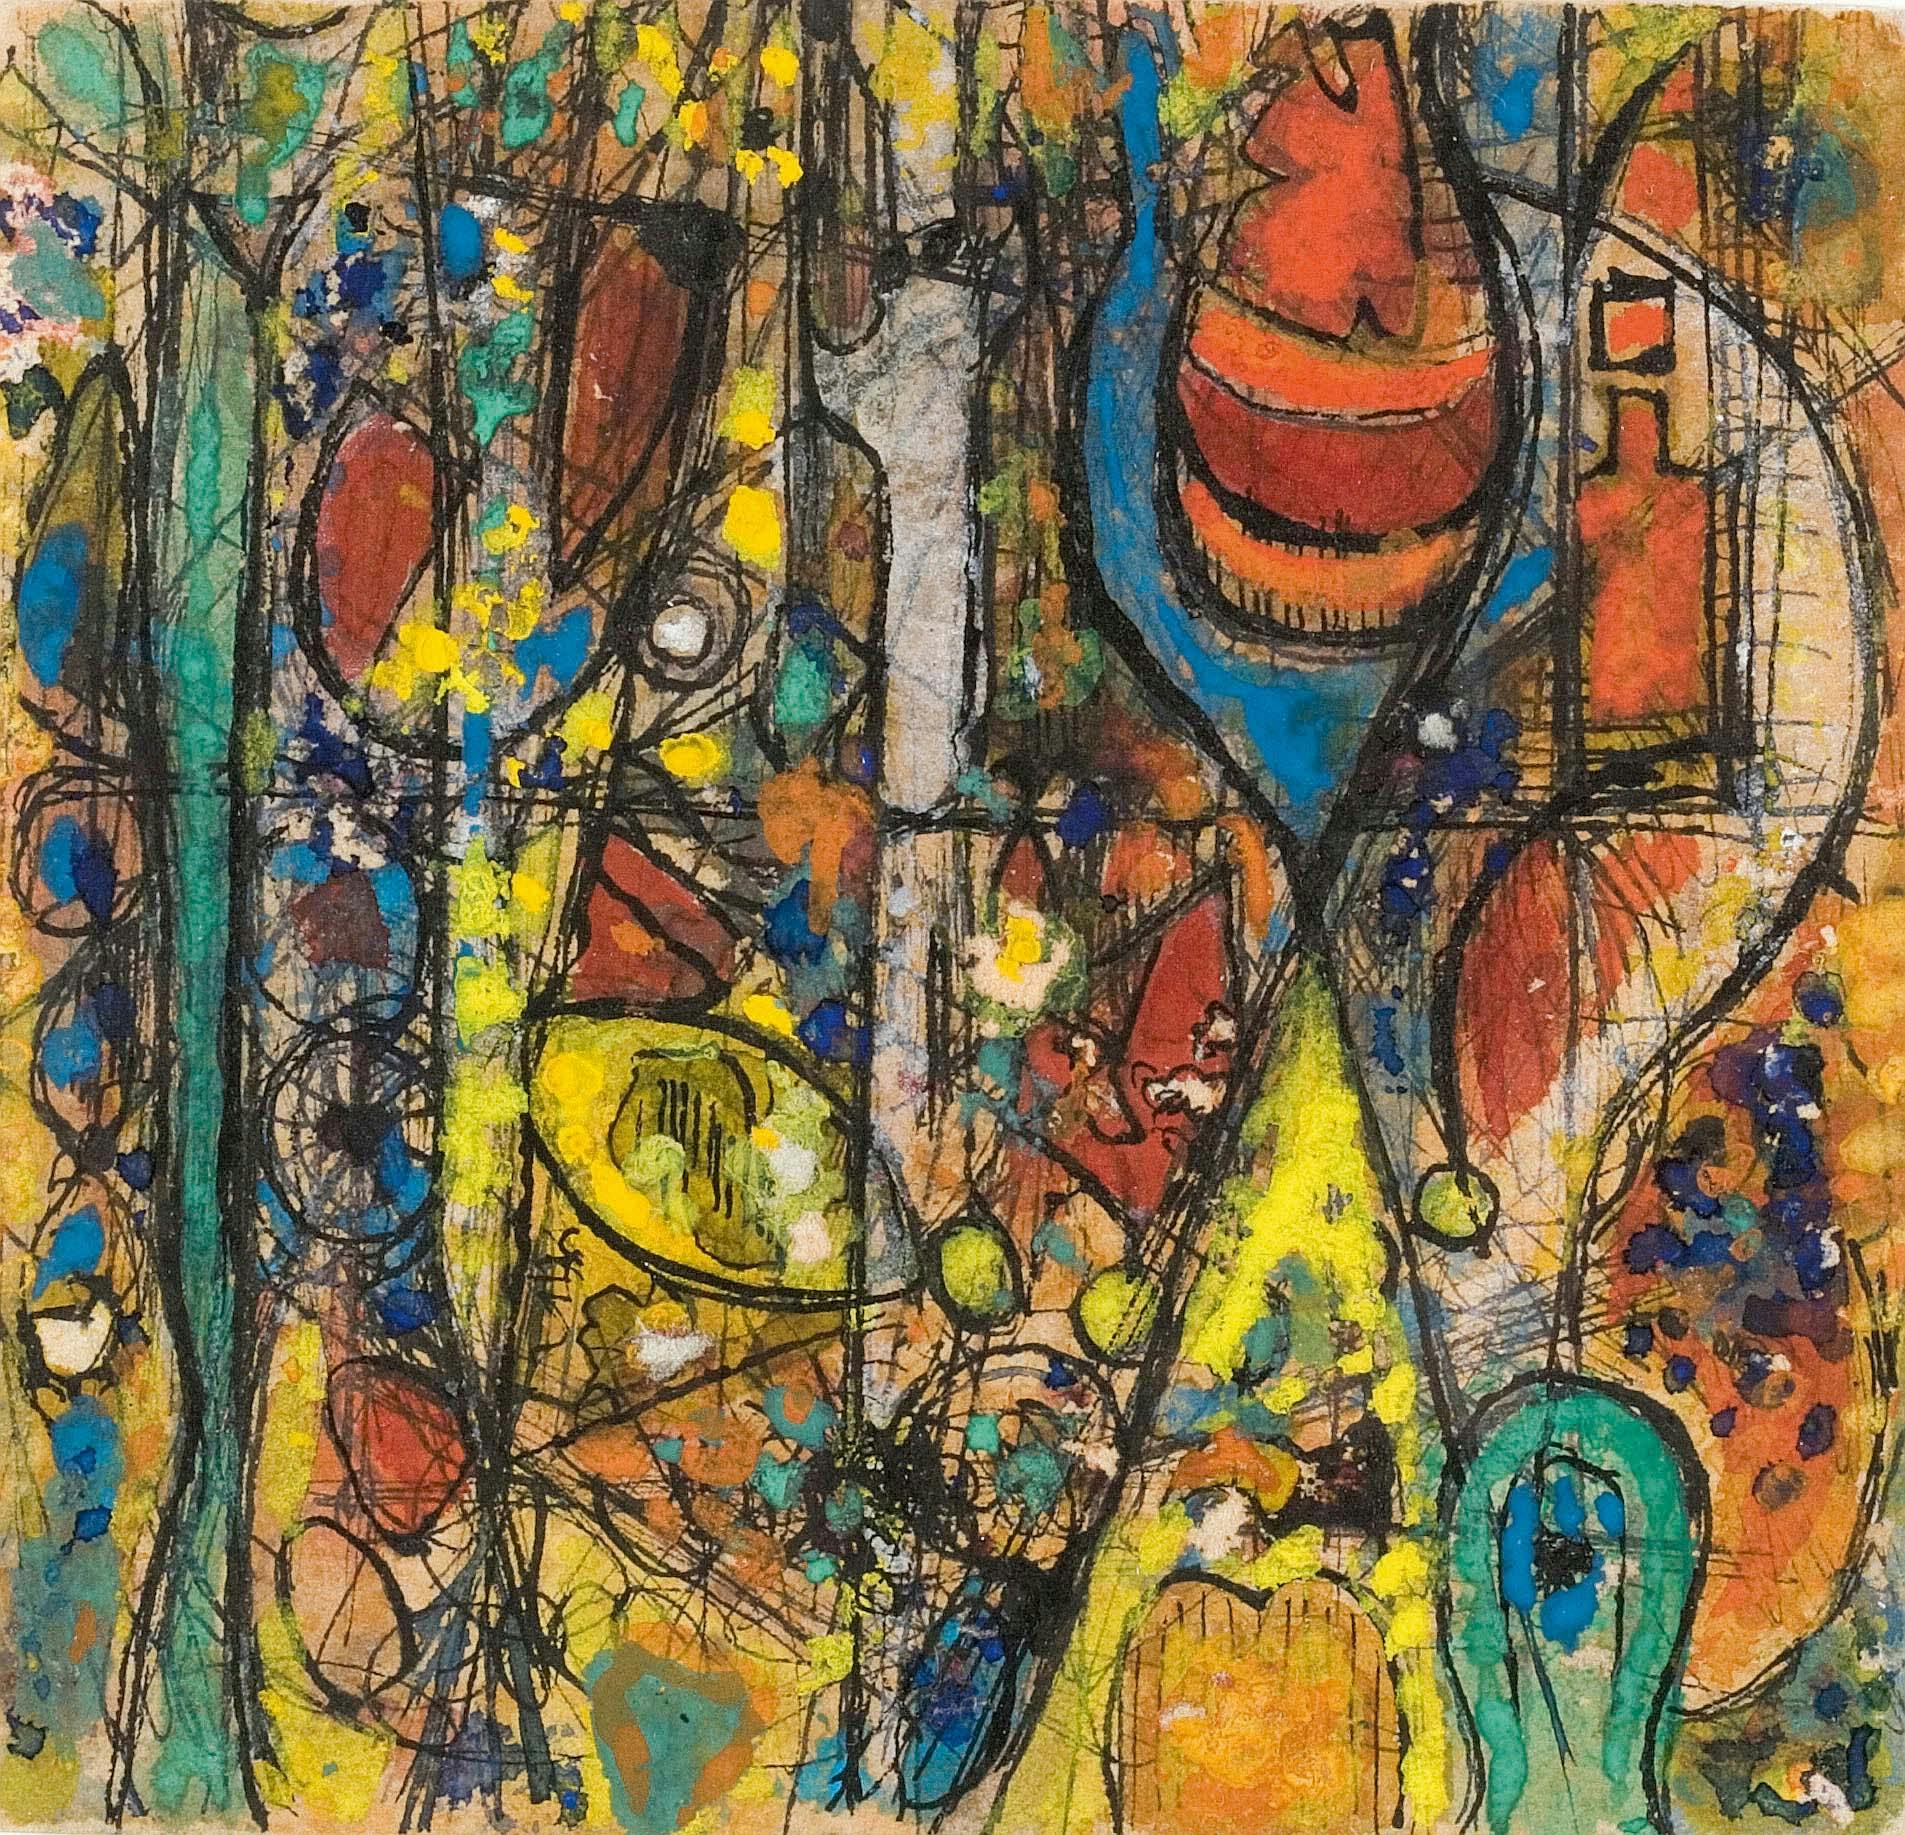 Jane
1940
Watercolor ink, and gouache on paper
4 5/8 x 4 3/4 in. (11.7 x 12.1 cm)
Los Angeles County Museum of Art, Gift of the Estate of Richard Pousette-Dart (M.2005.148.2)
 – The Richard Pousette-Dart Foundation